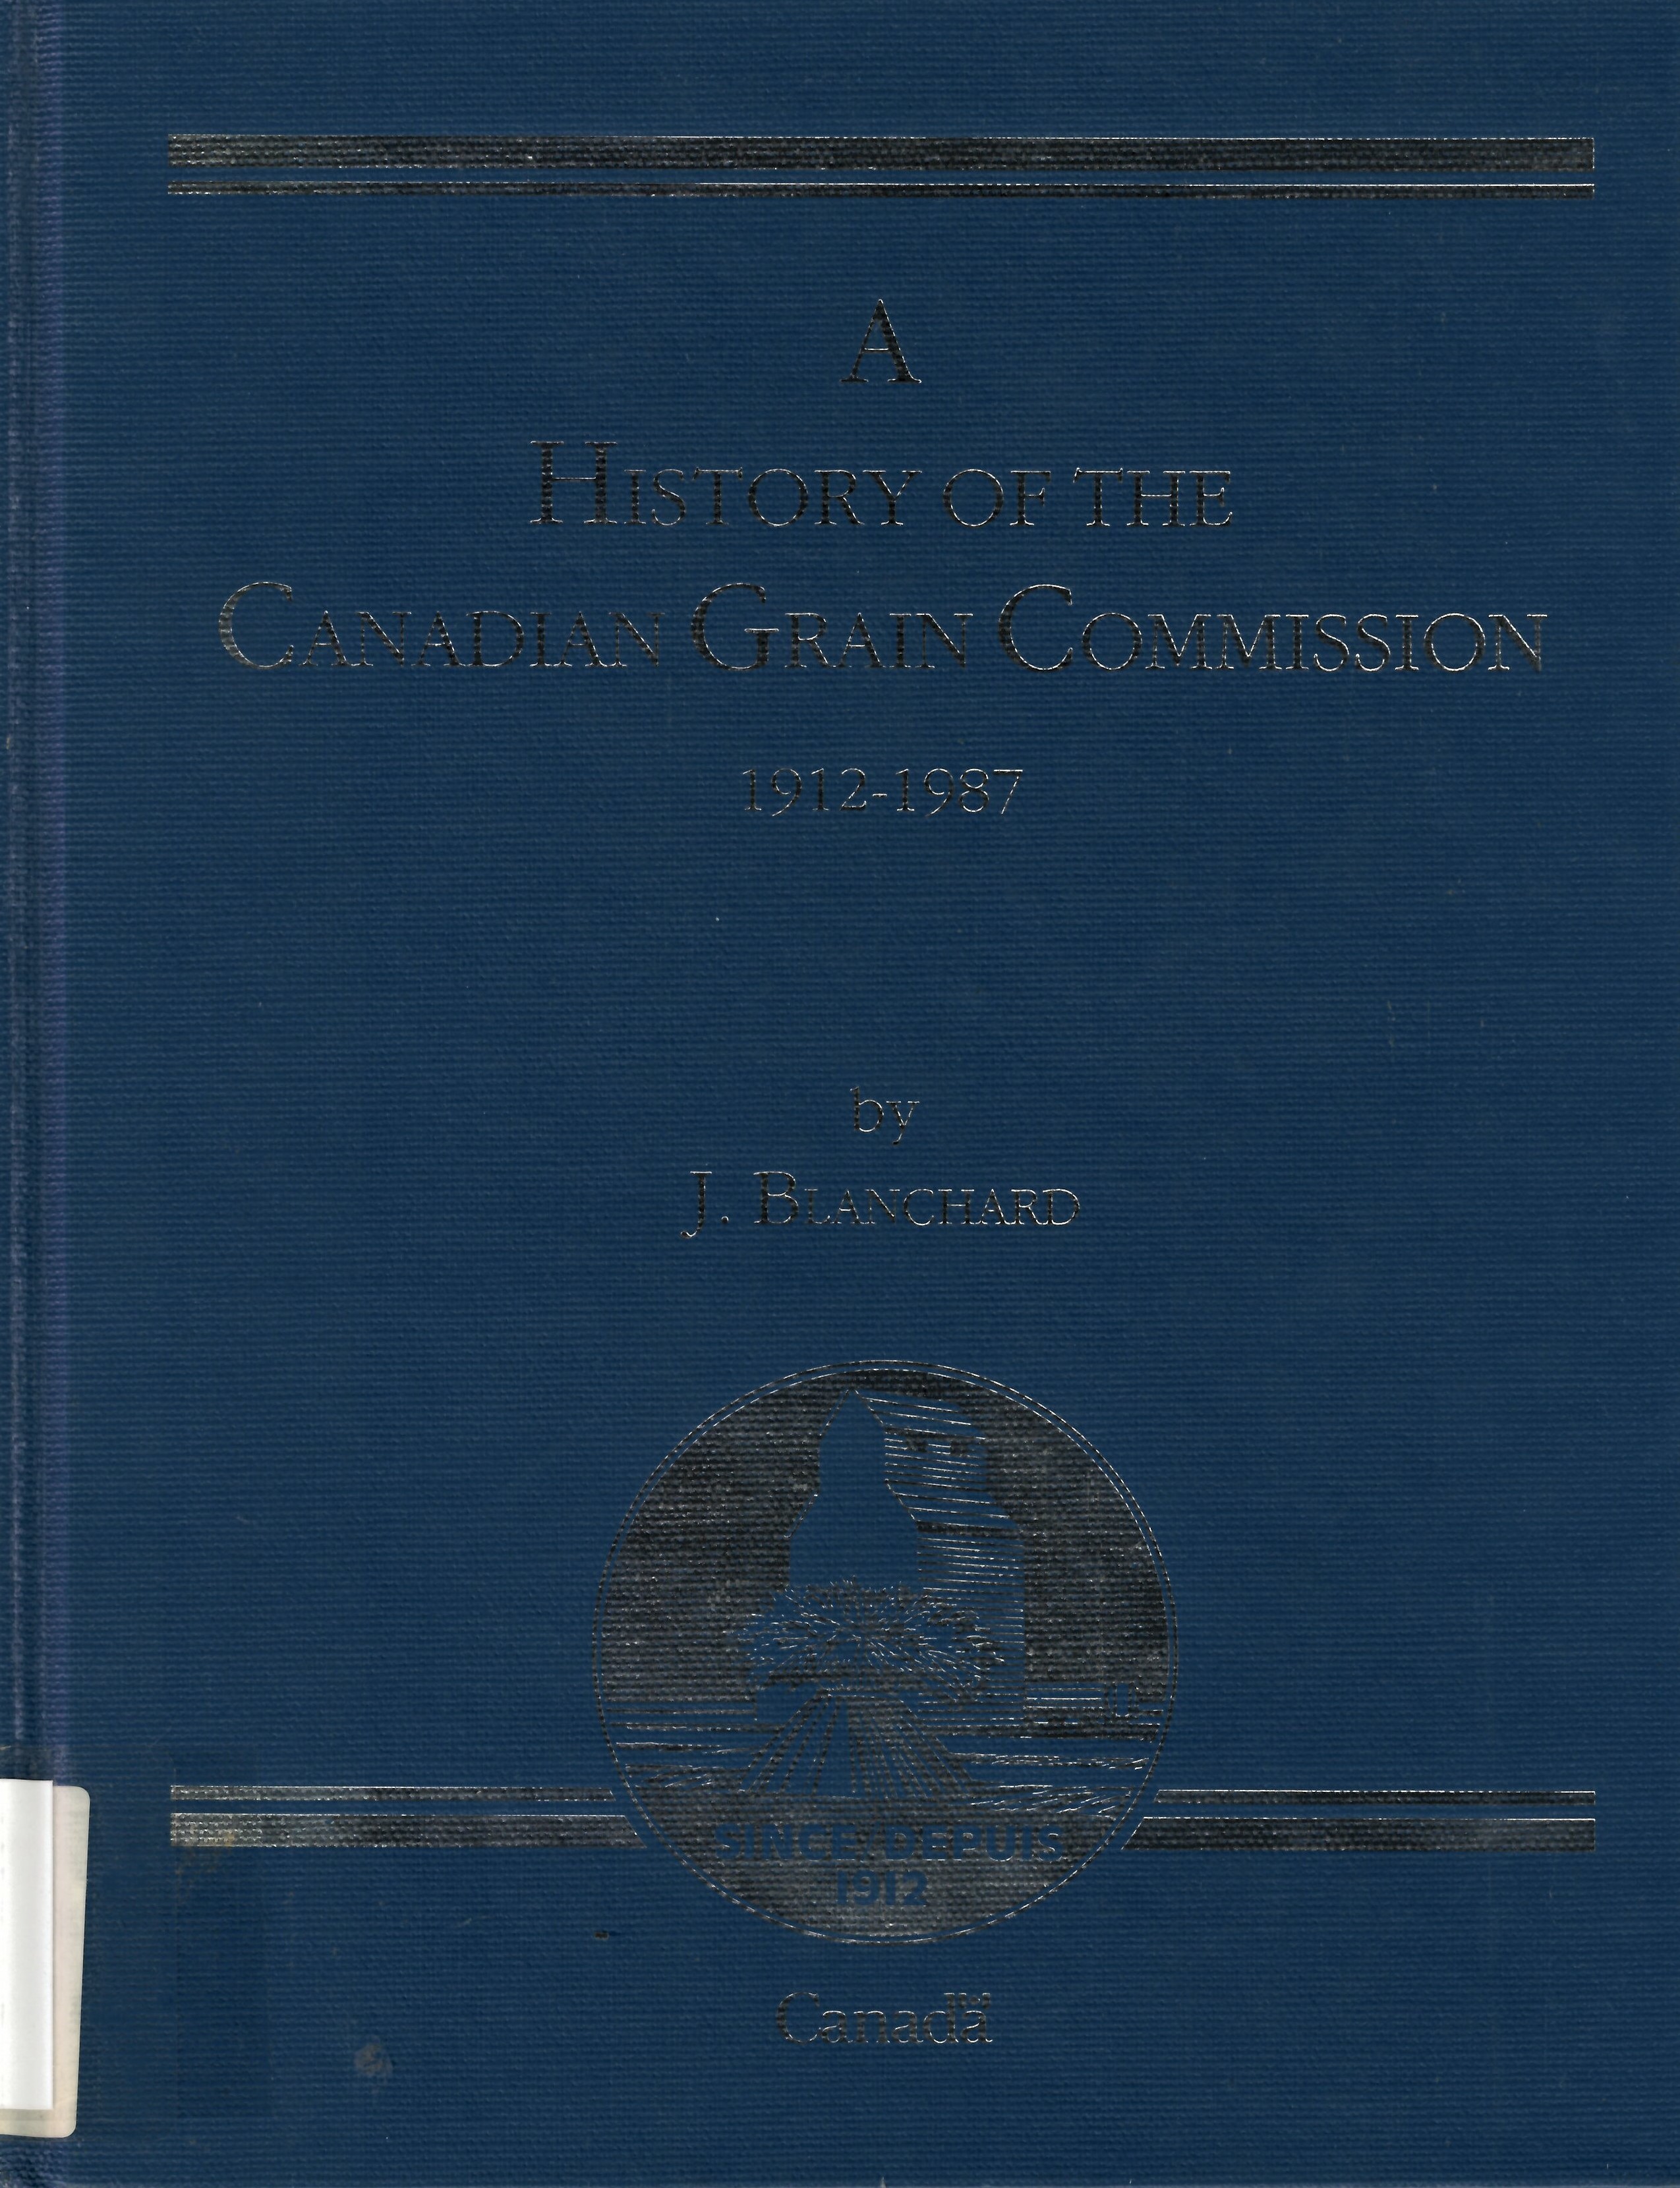 History of the Canadian Grain Commission